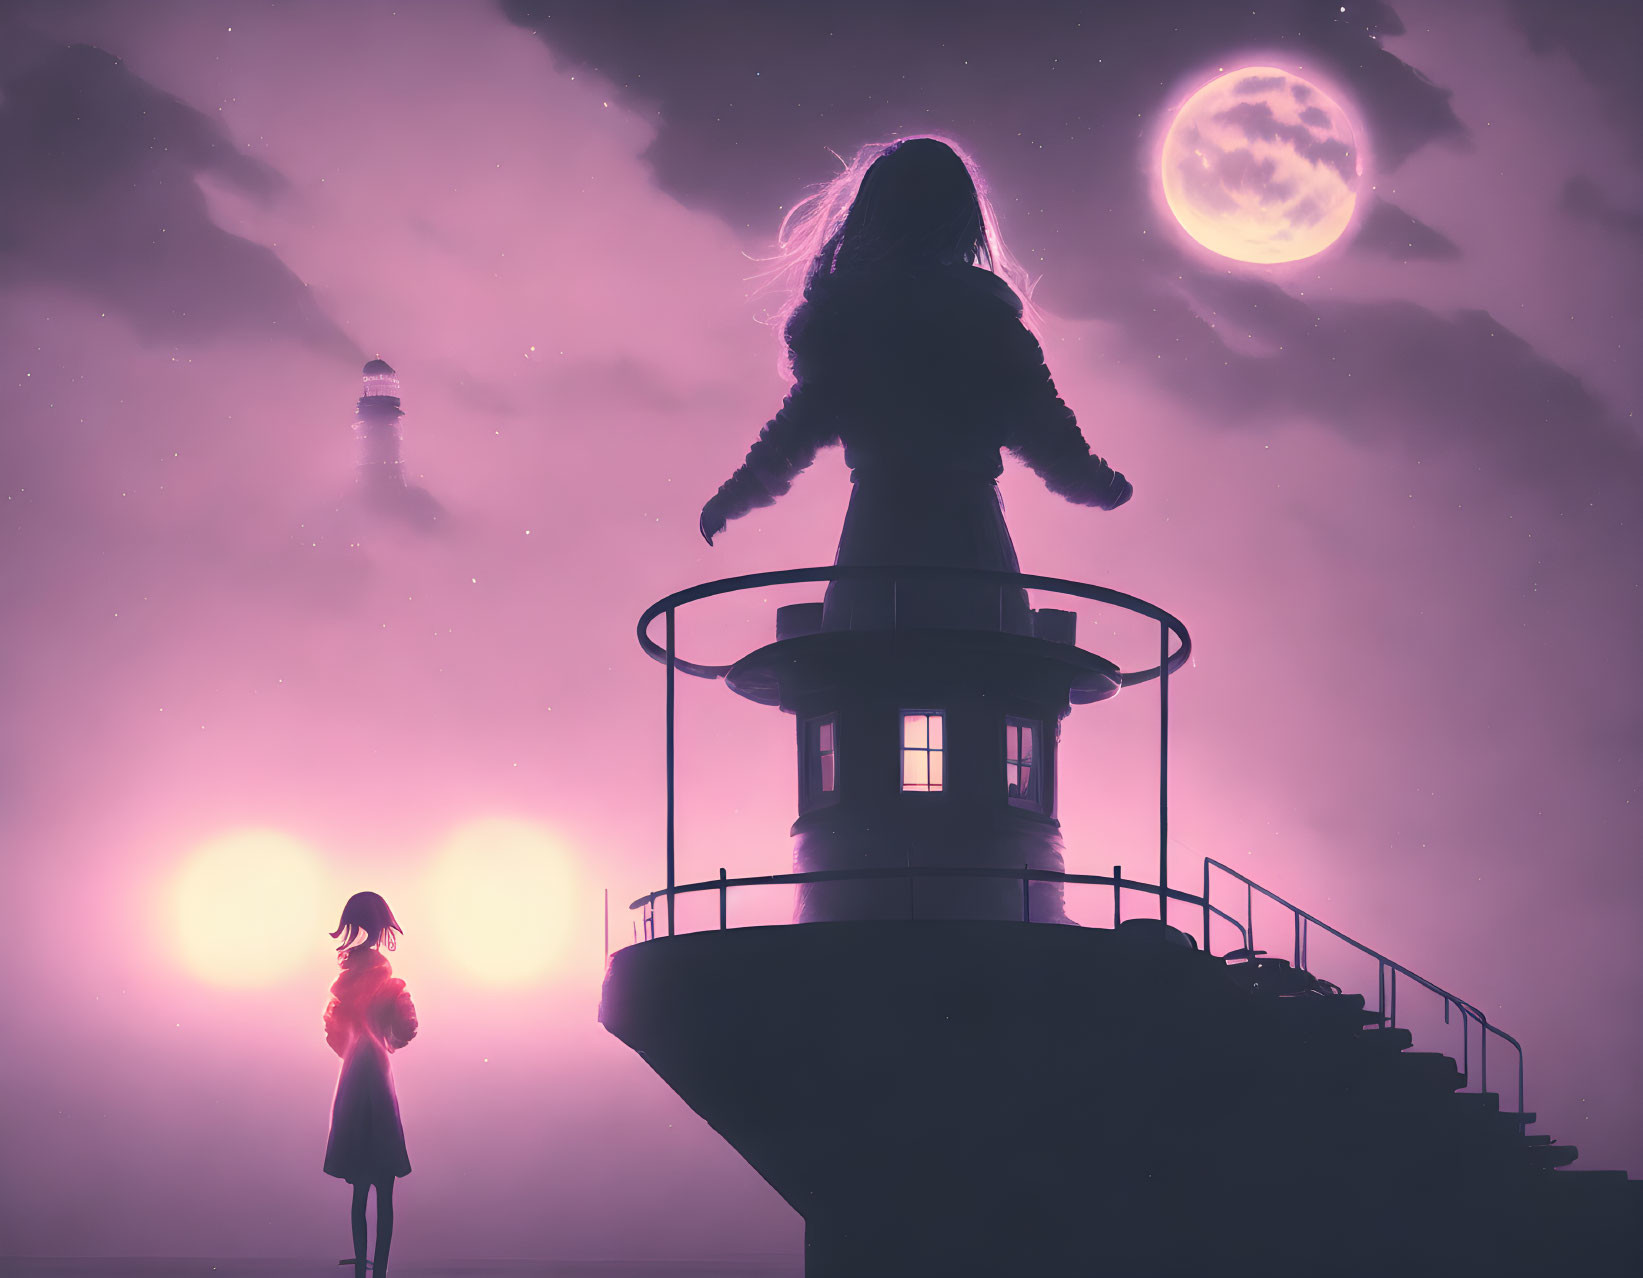 The girl at the lighthouse